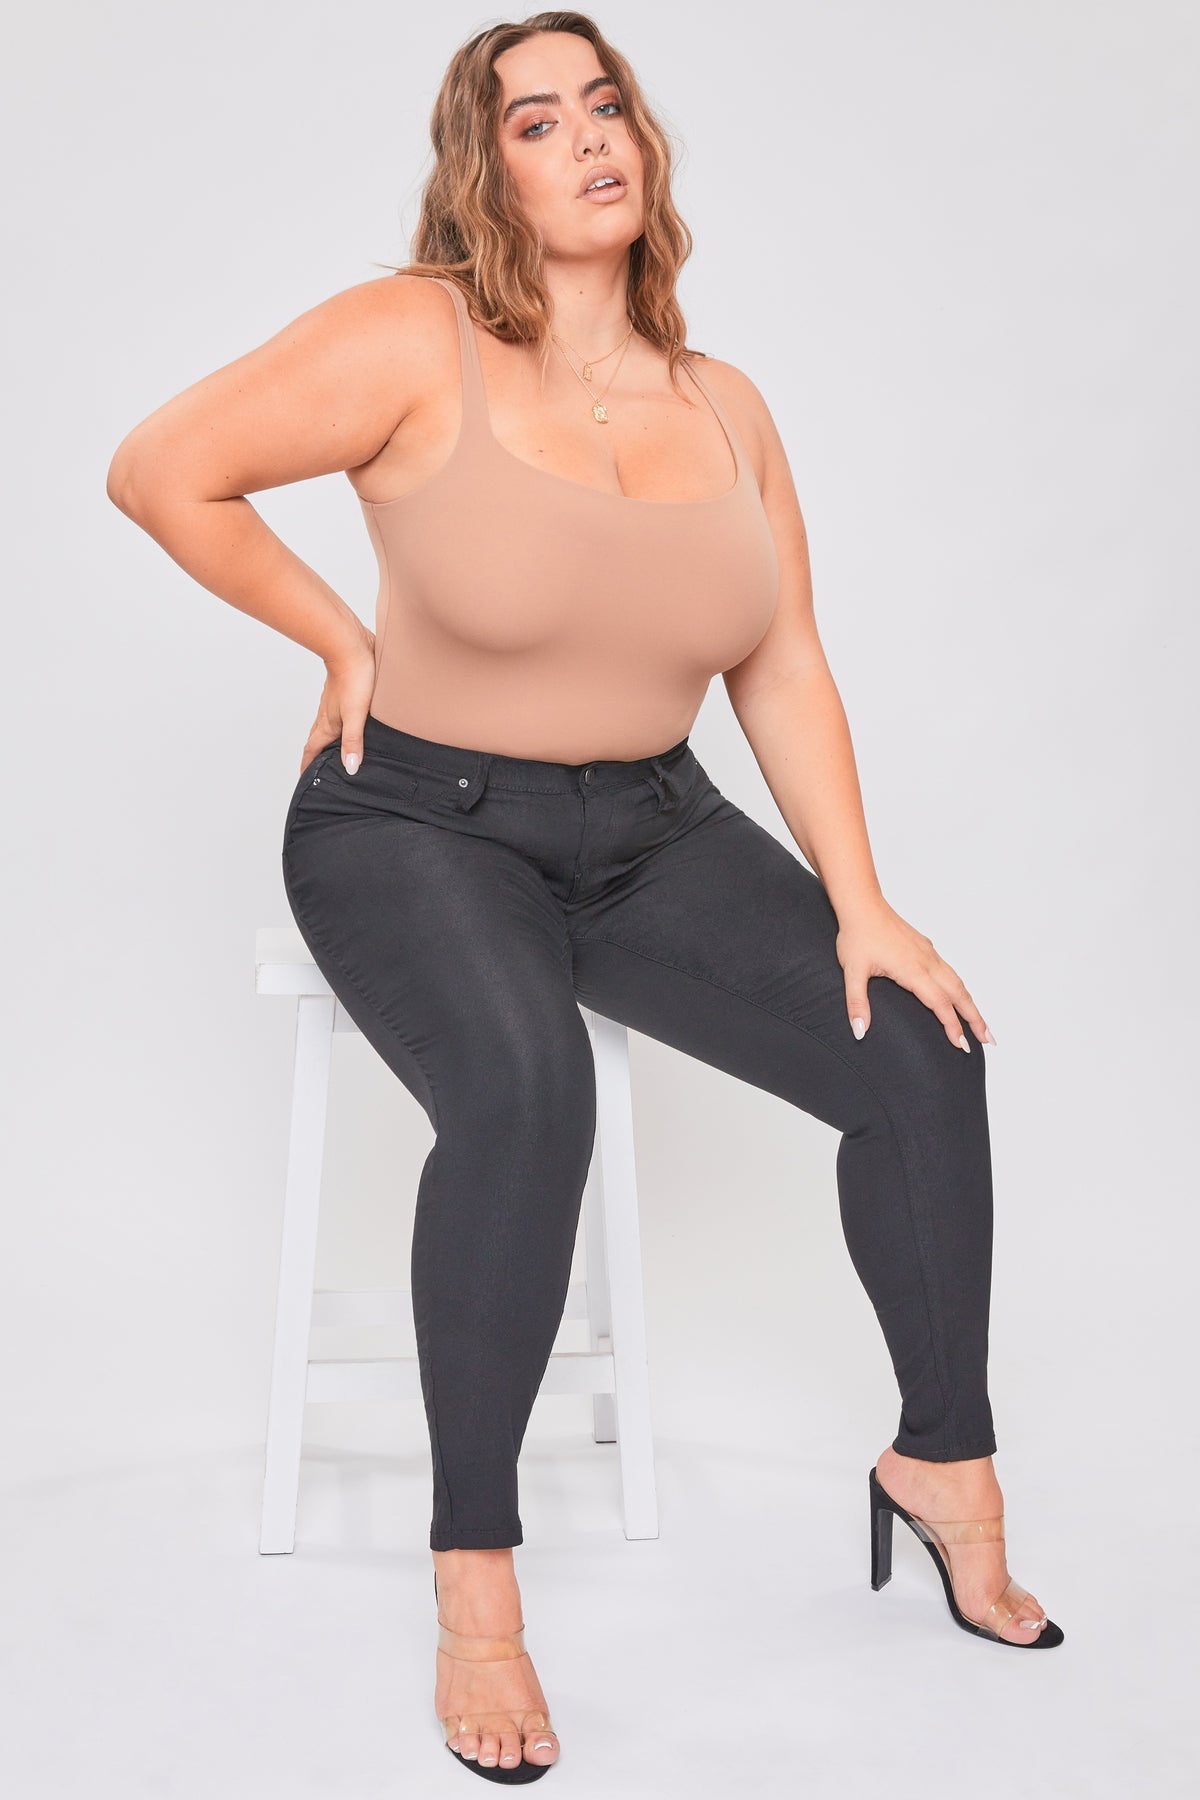 YMI Stretch Pant, Regular and Plus Size Pants